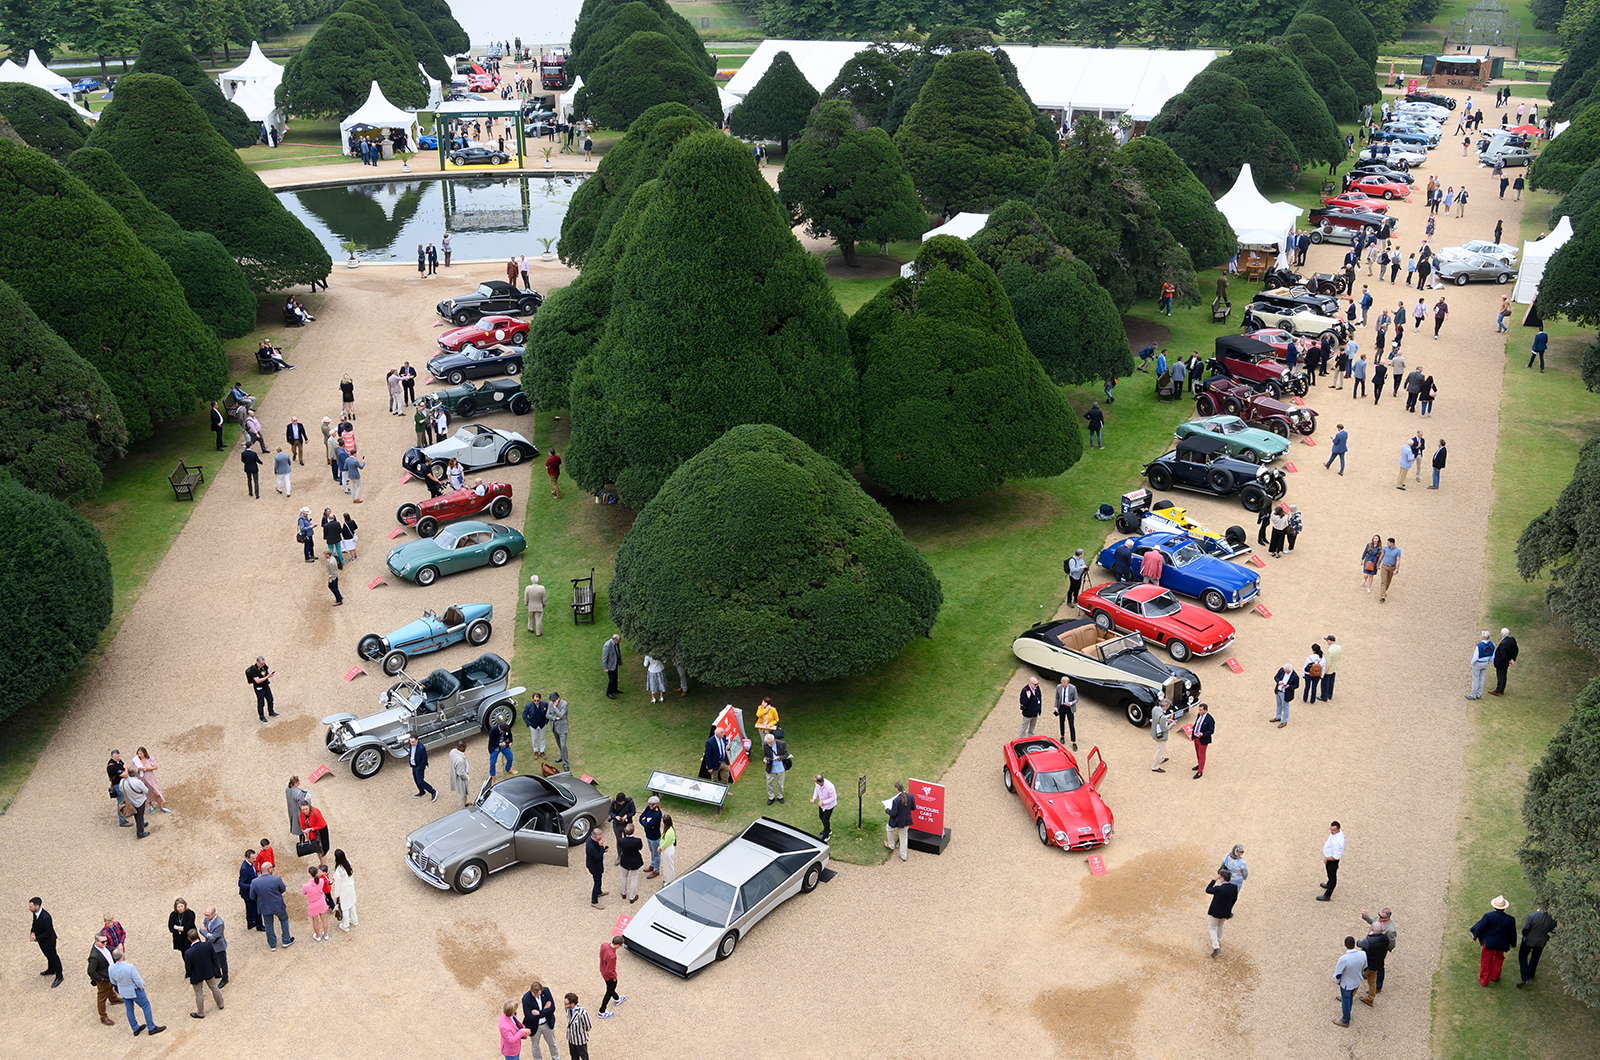 Classic & Sports Car - Former winners returning to Concours of Elegance